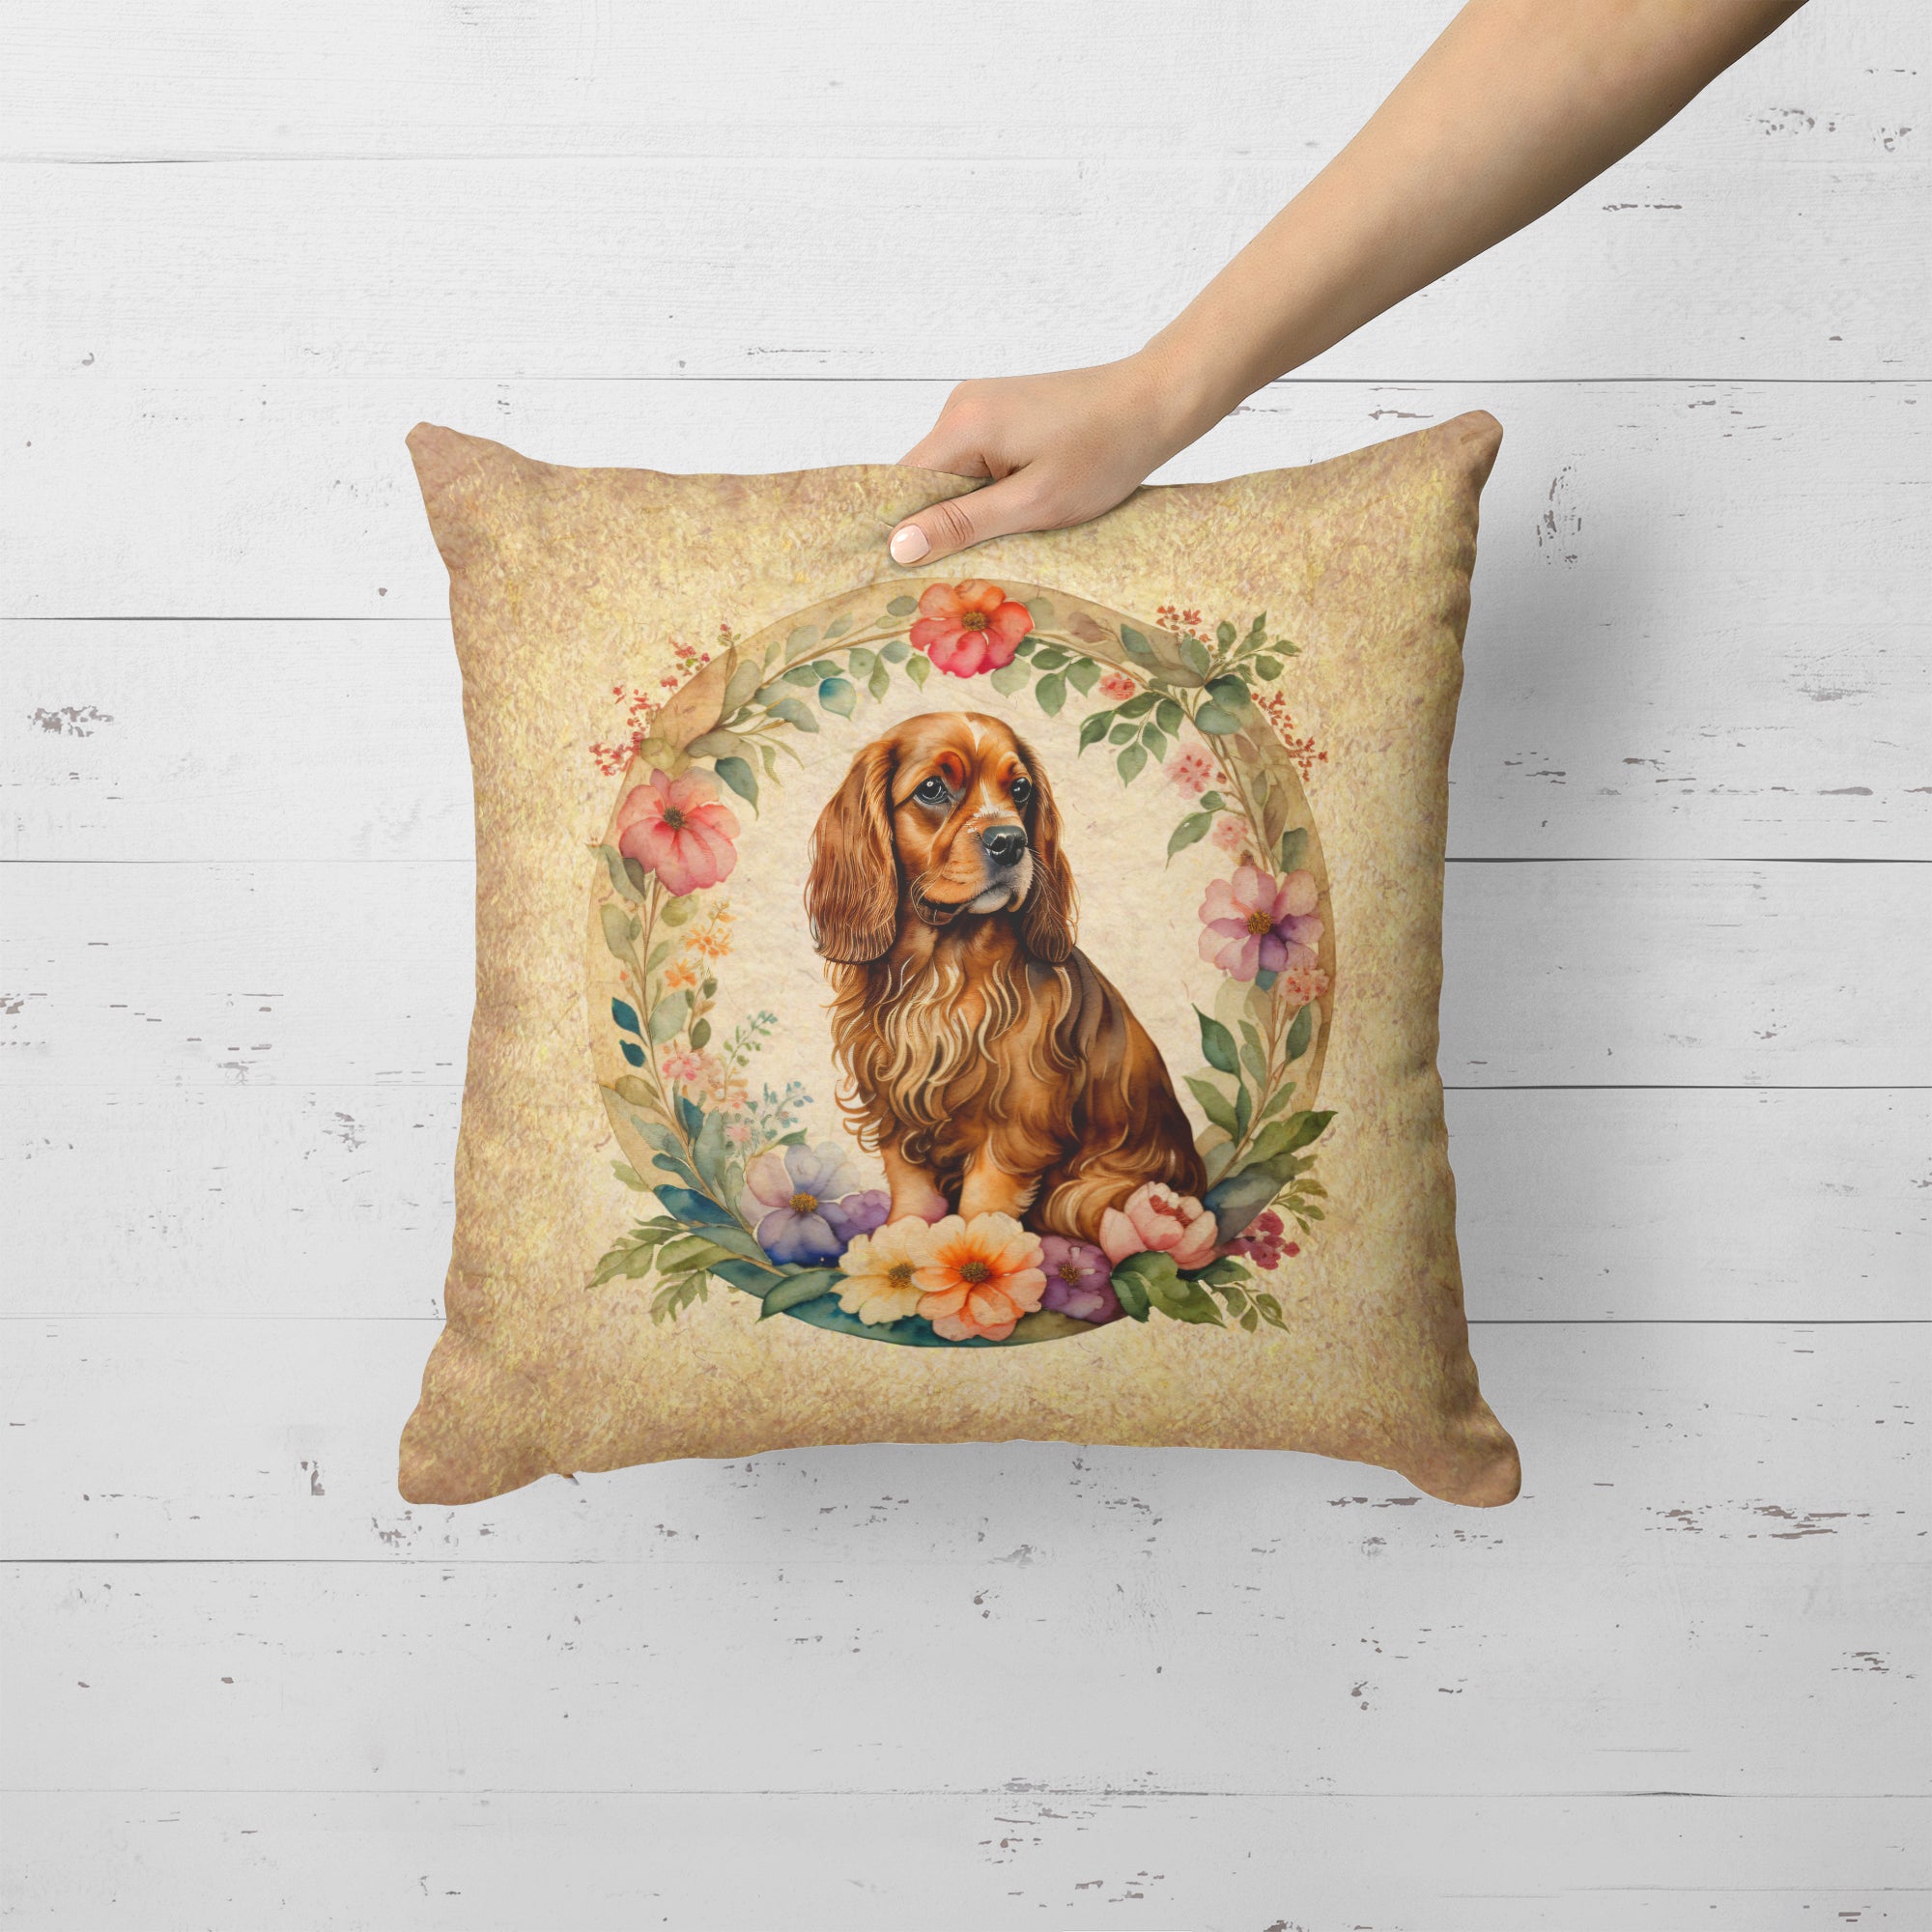 Buy this Sussex Spaniel and Flowers Fabric Decorative Pillow